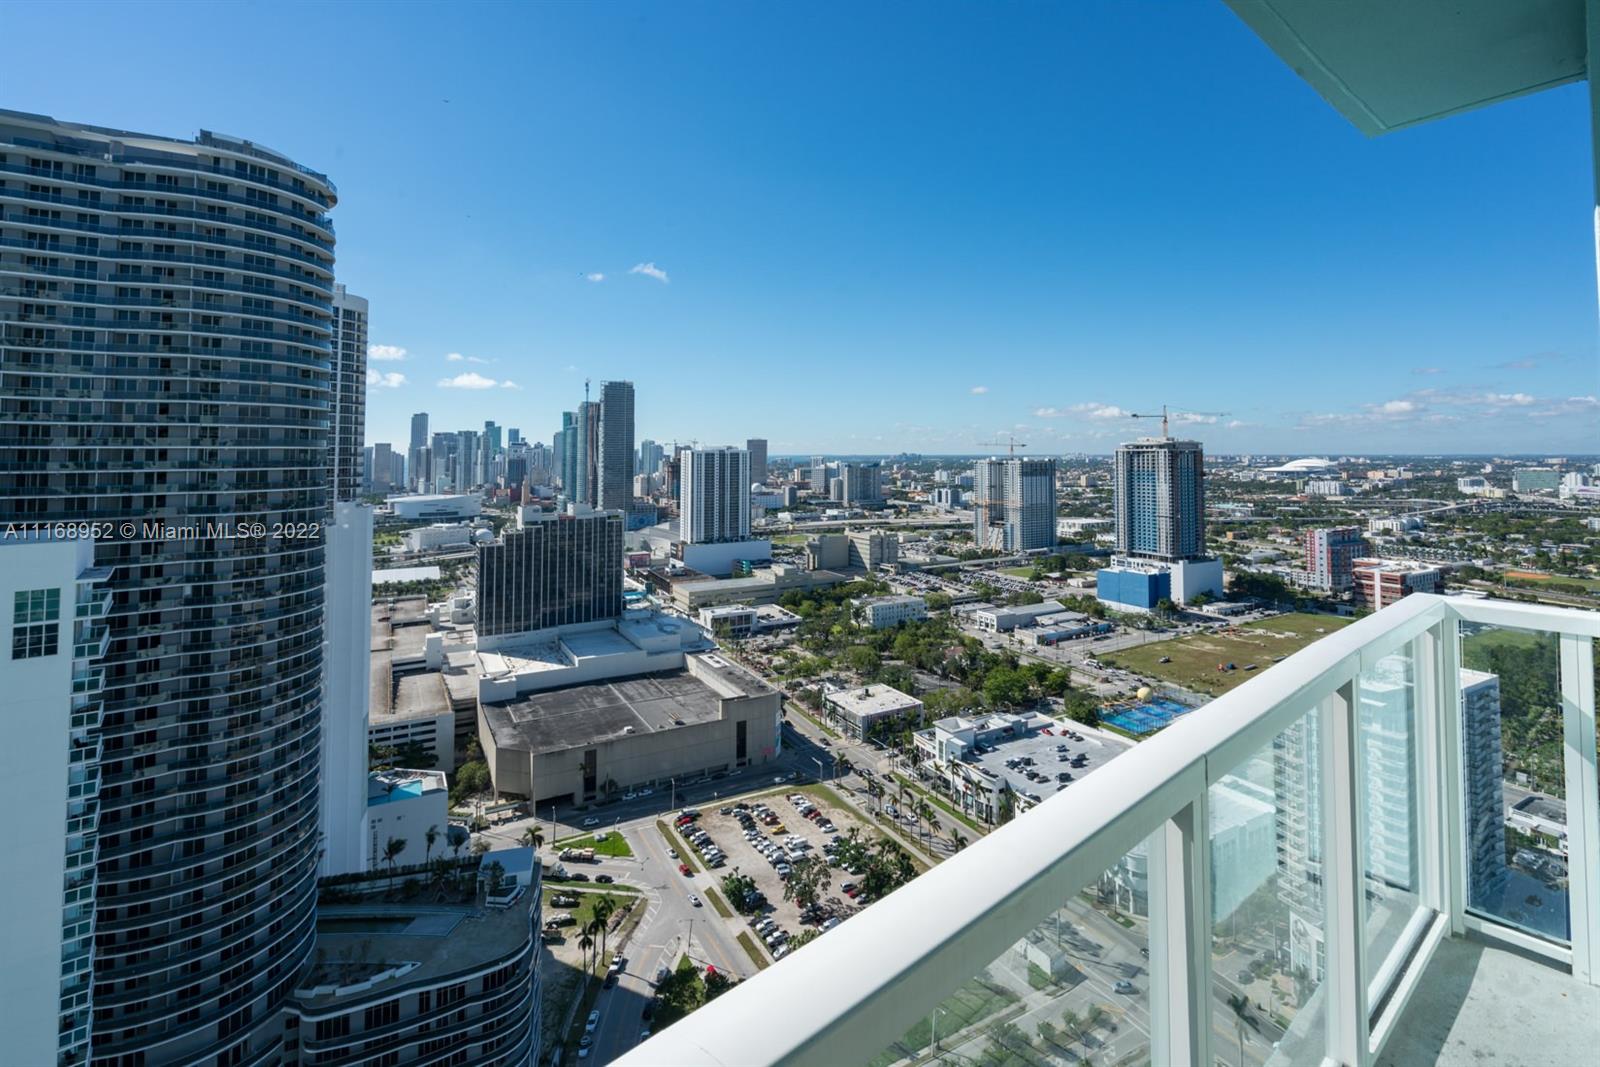 Spacious 1 Bed 1 1/2 Bath at Quantum on the Bay with great views from the 39th floor.Building features great amenities like 2 swimming pools, state of the art fitness center and much more.